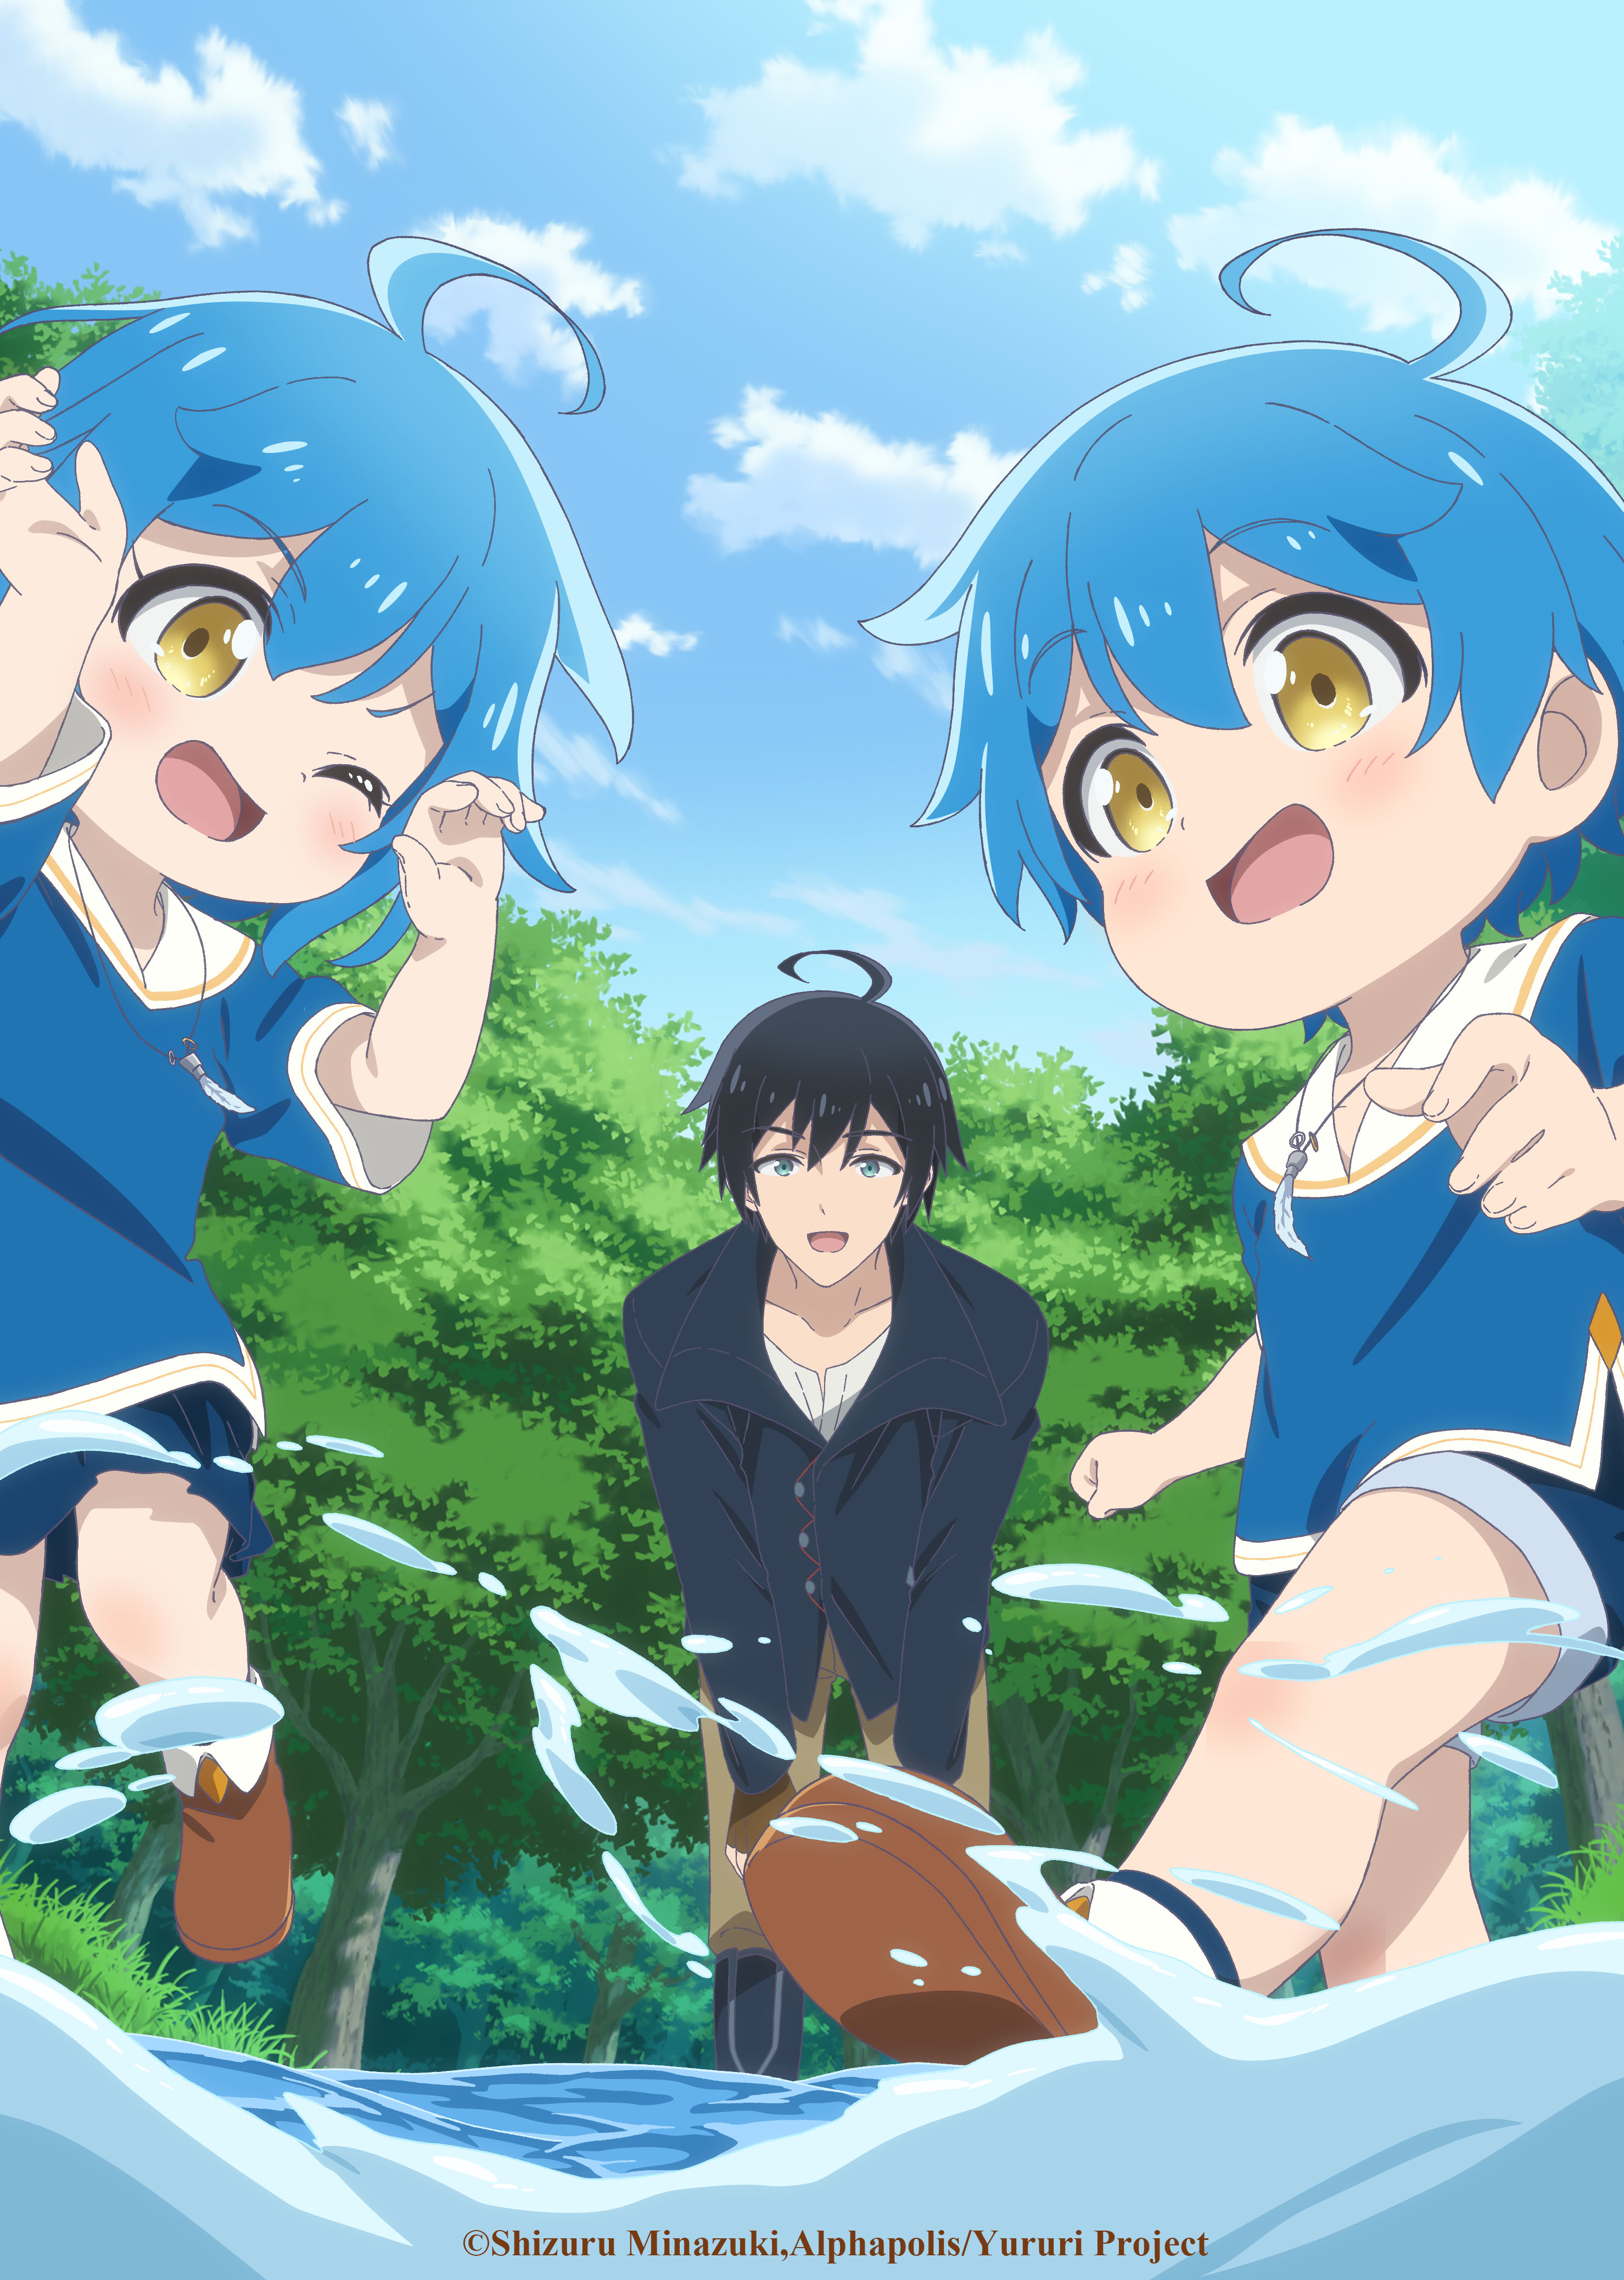 A Journey Through Another World: Raising Kids While Adventuring anime